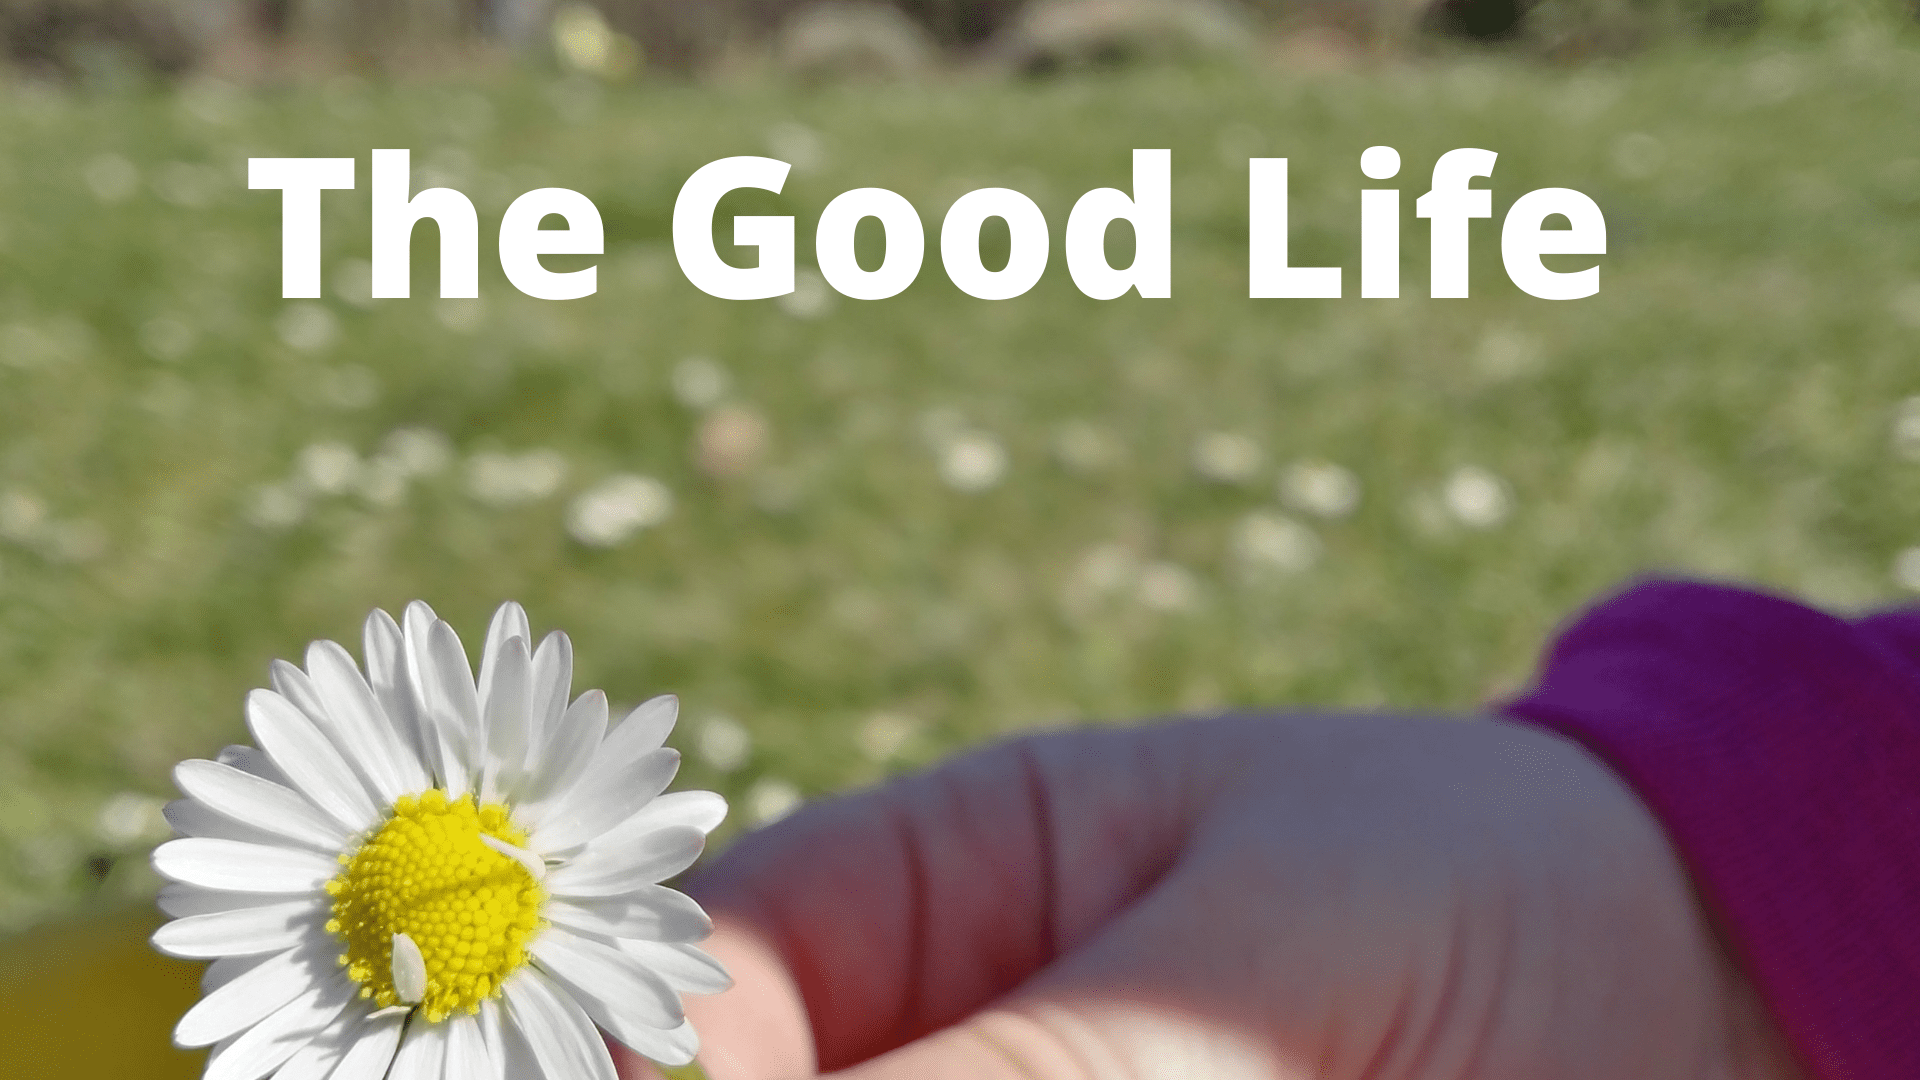 Featured image for “The Good Life”